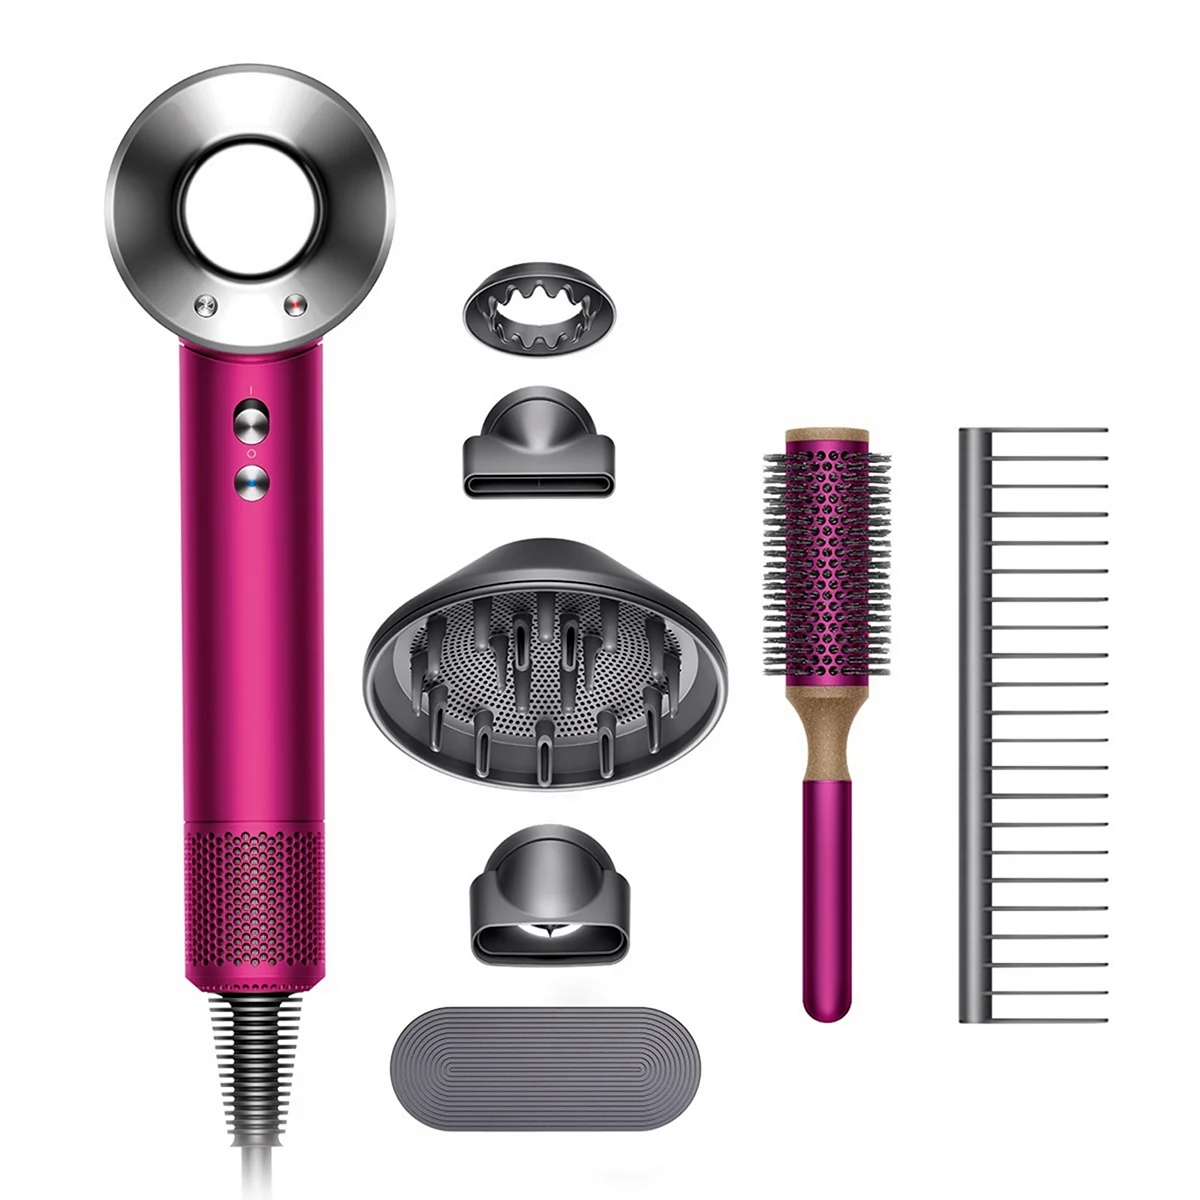 Dyson Supersonic hd01